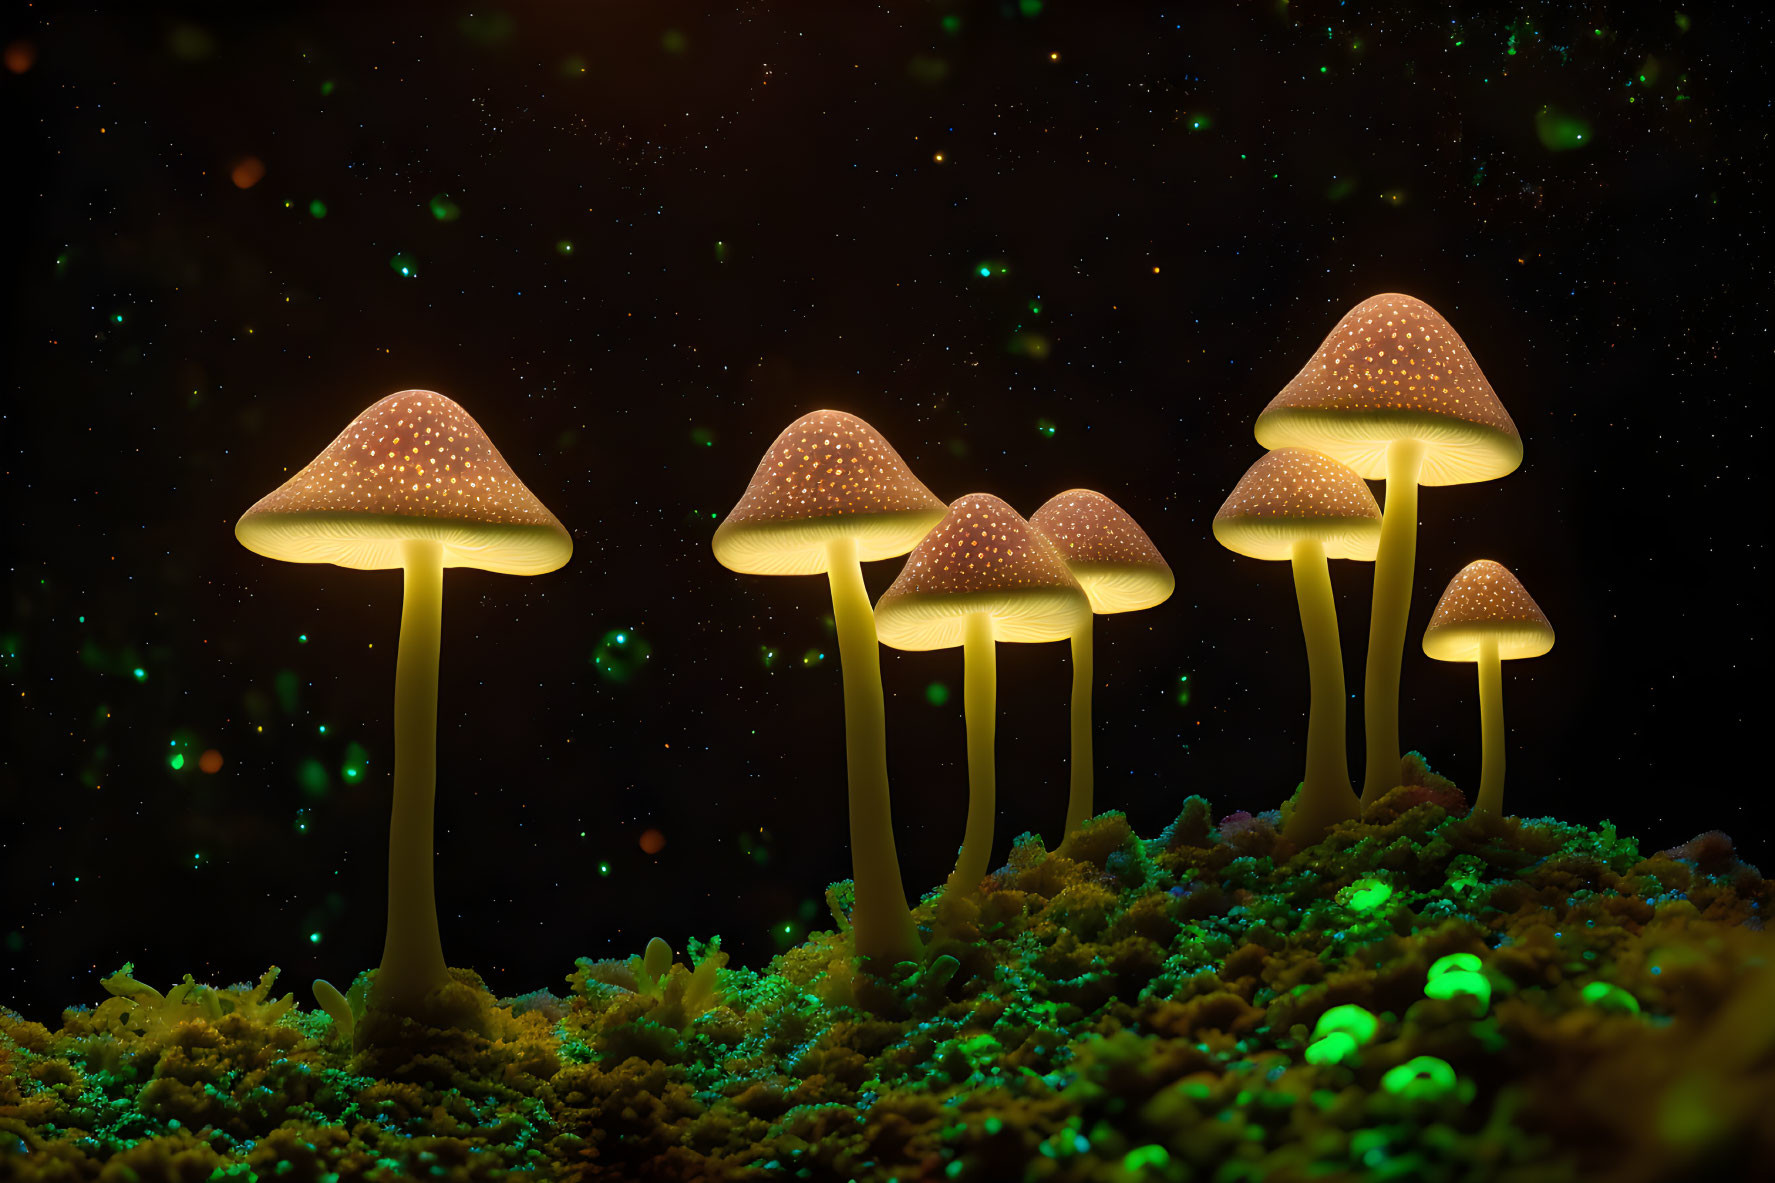 Glowing mushrooms in magical forest with bioluminescent particles